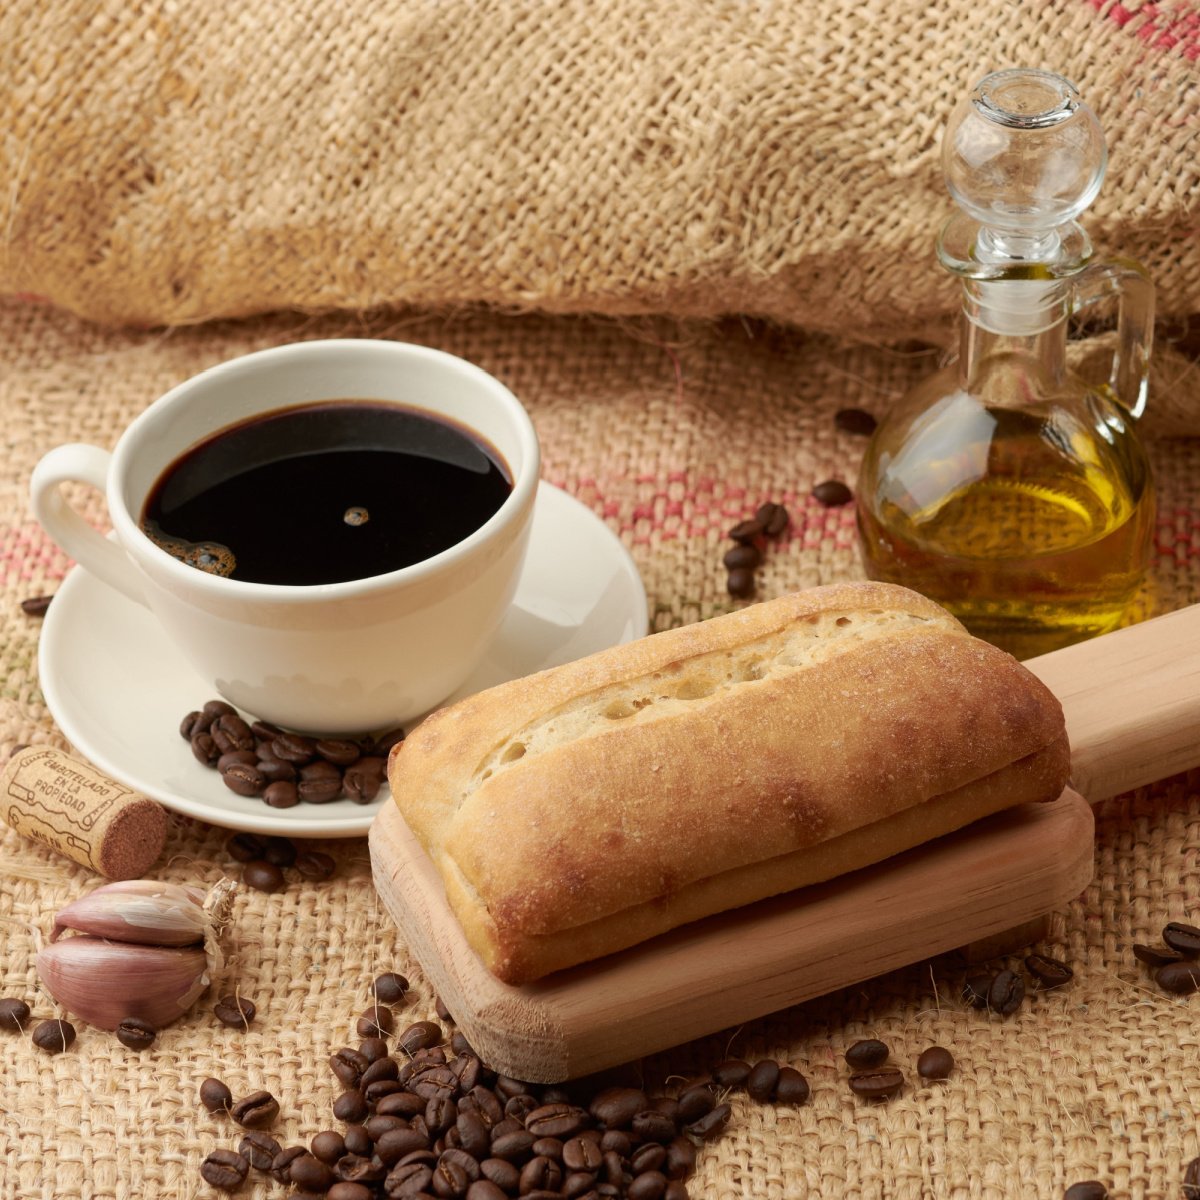 bottle of olive oil beside cup of coffee and bread on sack